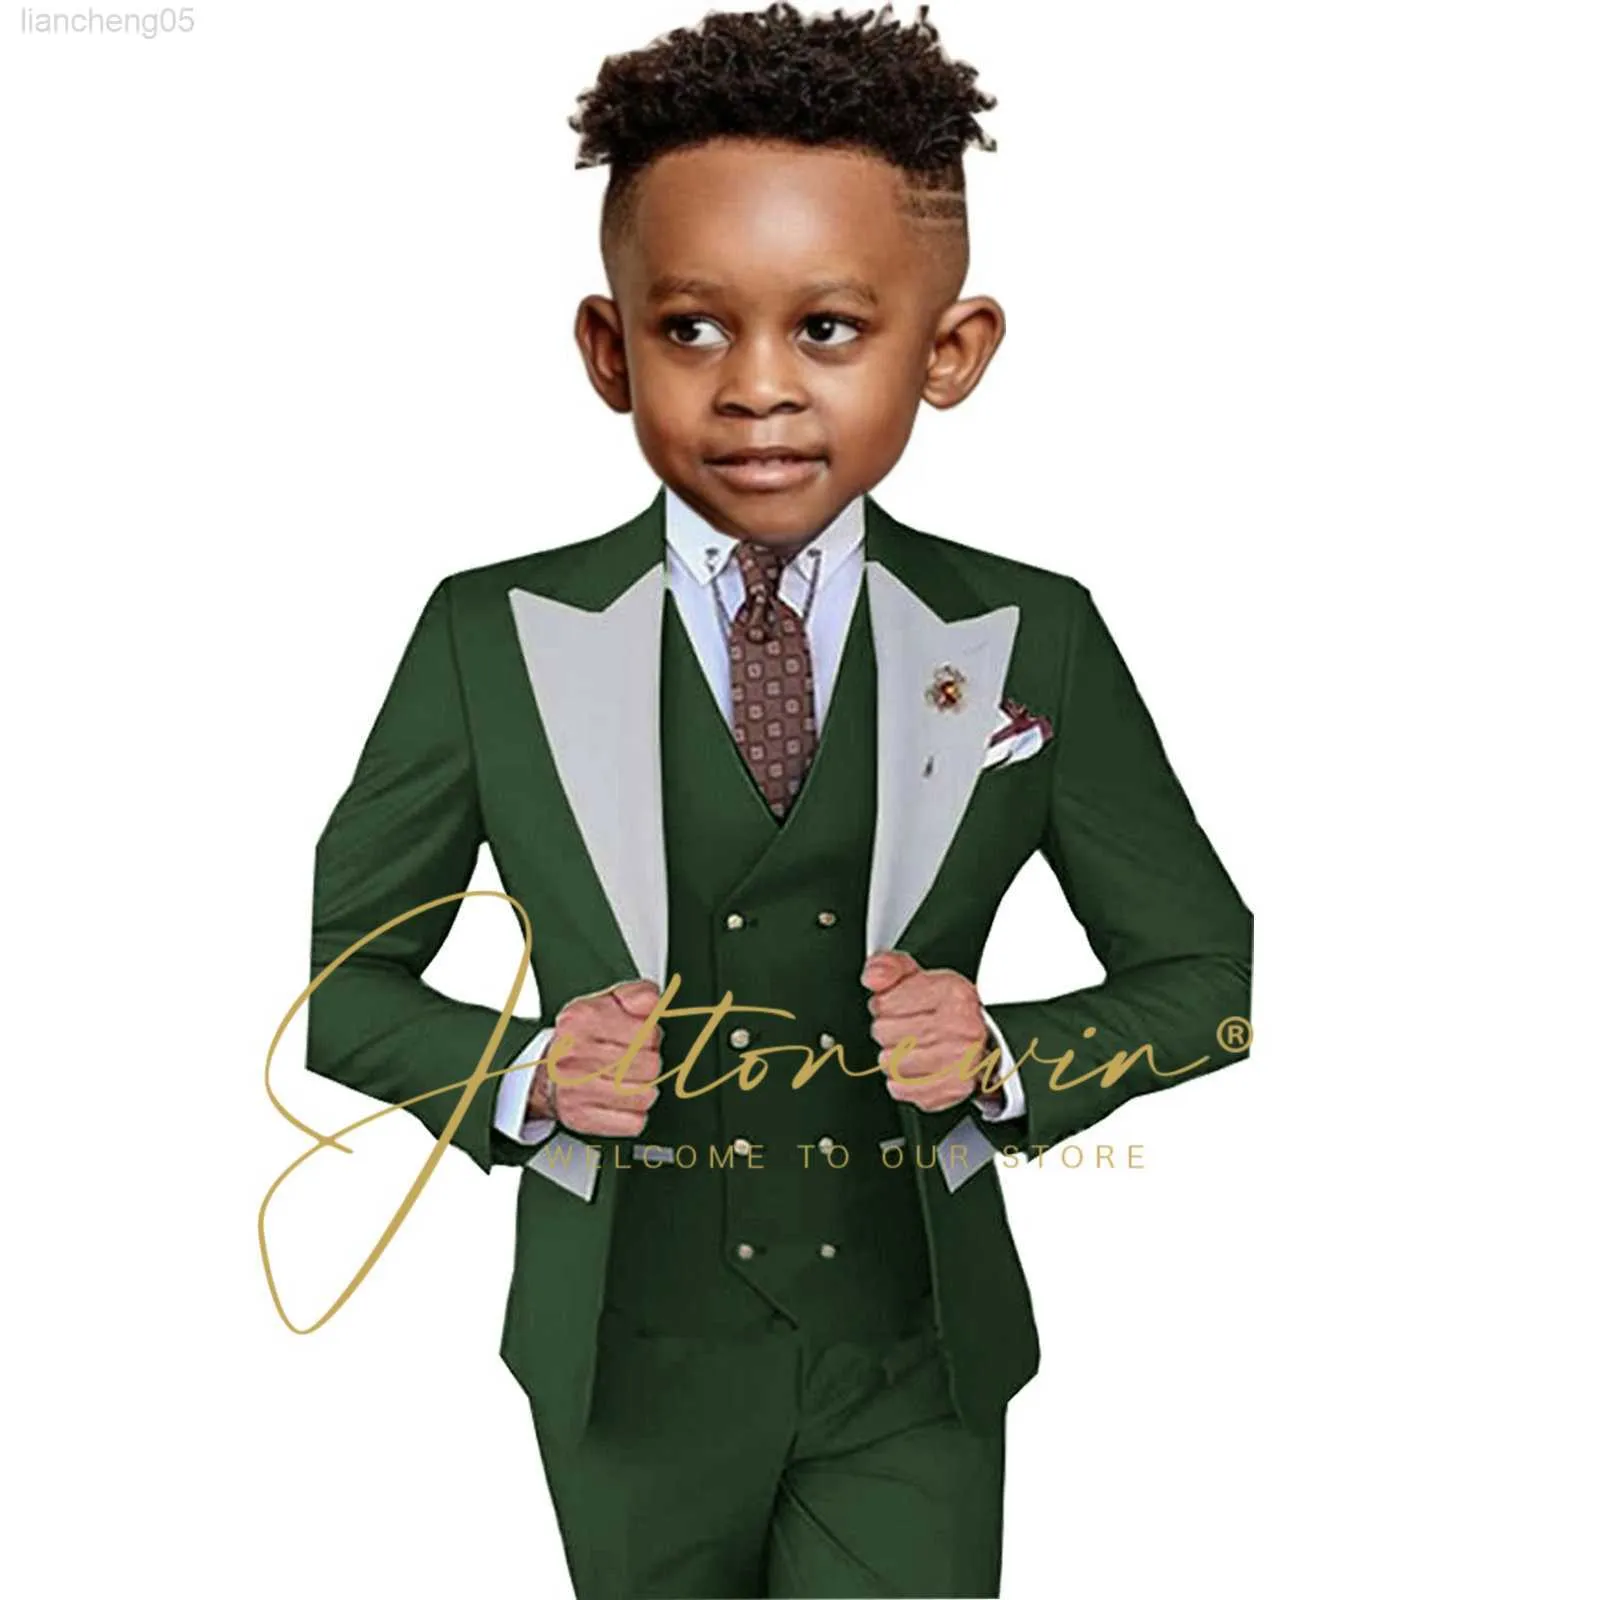 Clothing Sets Dark Green Suit For Boys Formal Party Jacket Pants Vest 3 Piece 3-16 Years Old Silver Lapel Wedding Tuxedo Kids Blazer Child Set W0224